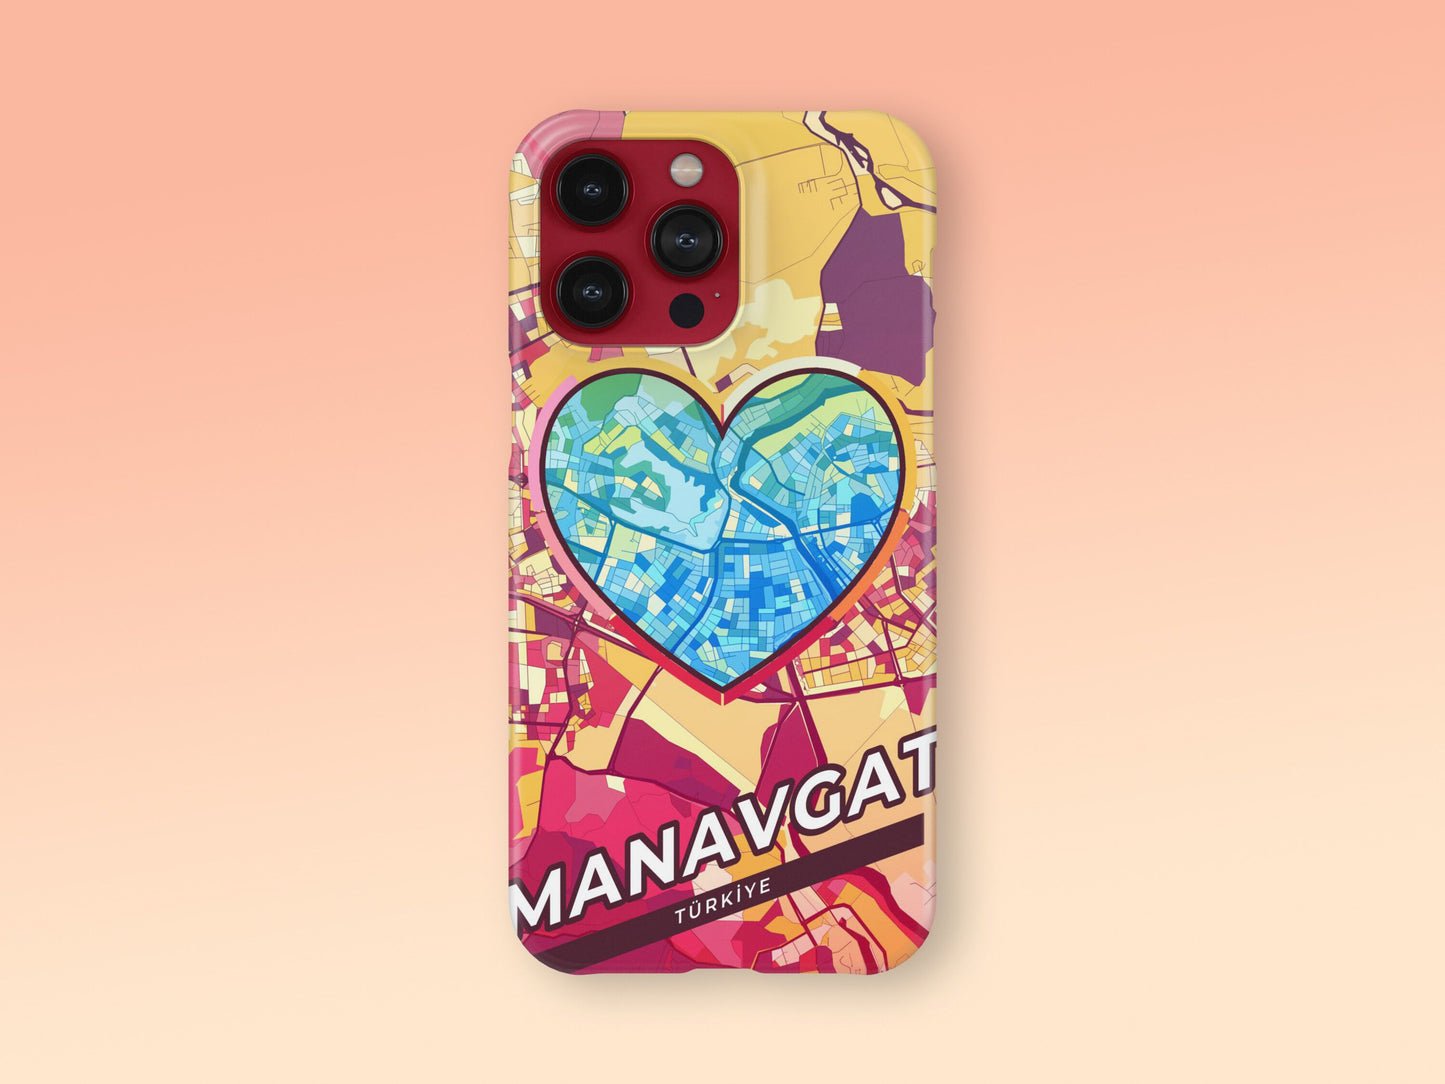 Manavgat Turkey slim phone case with colorful icon. Birthday, wedding or housewarming gift. Couple match cases. 2